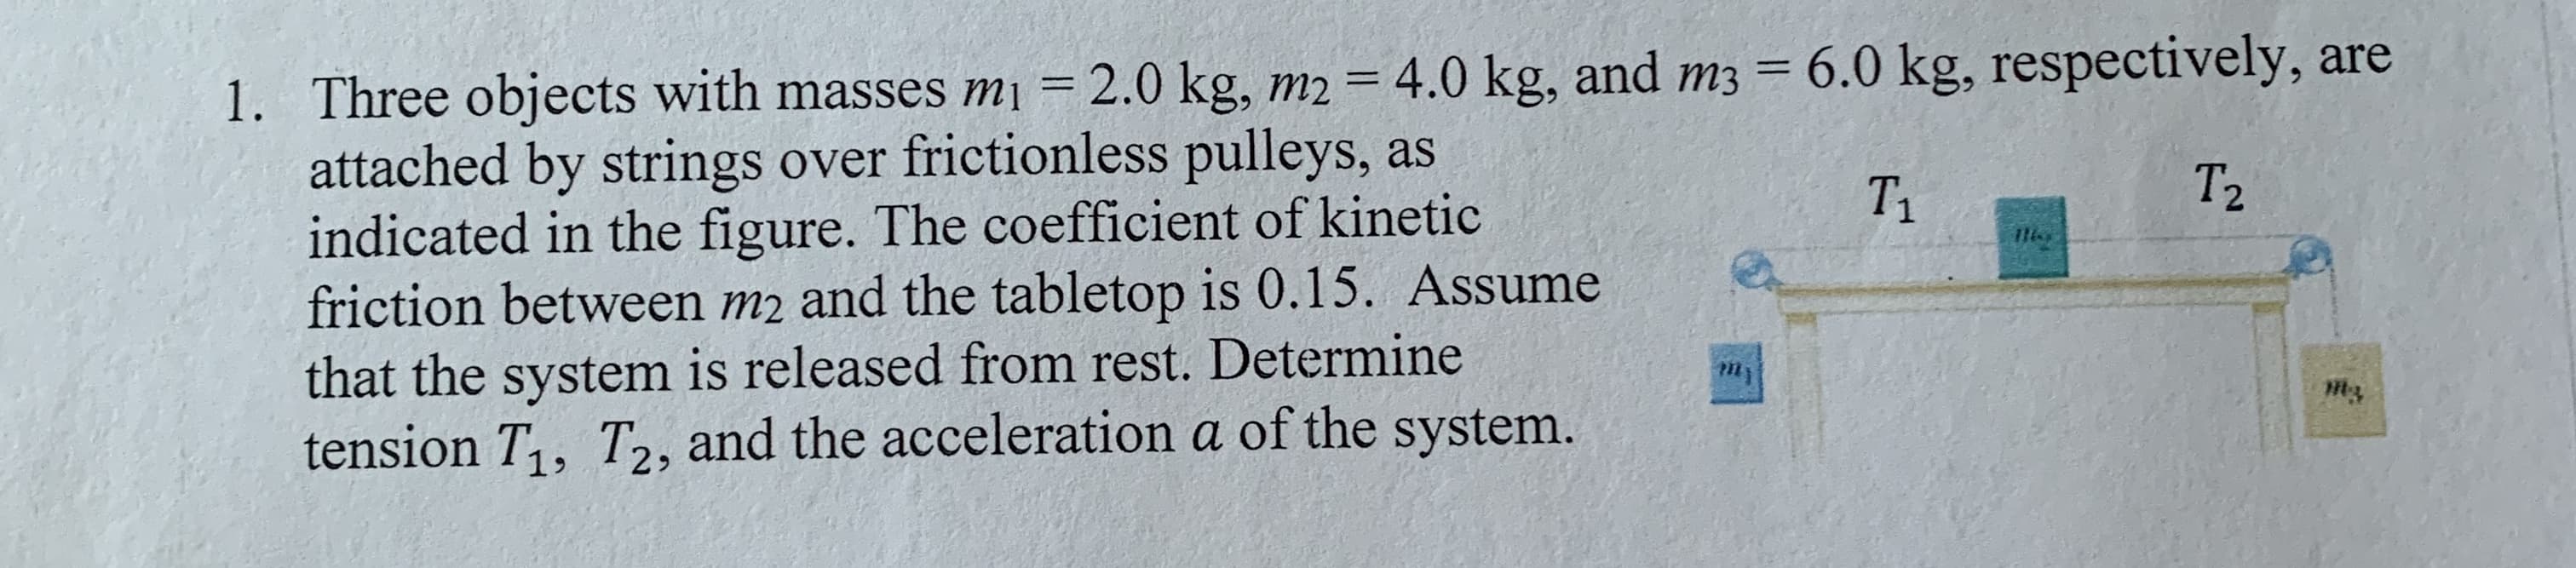 1. Three objects with masses mi 2.0 kg, m2 = 4.0 kg, and m3 = 6.0 kg, respectively, are
attached by strings over frictionless pulleys, as
indicated in the figure. The coefficient of kinetic
friction between m2 and the tabletop is 0.15. Assume
that the system is released from rest. Determine
tension T1, T2, and the acceleration a of the system.
Т2
Ti
